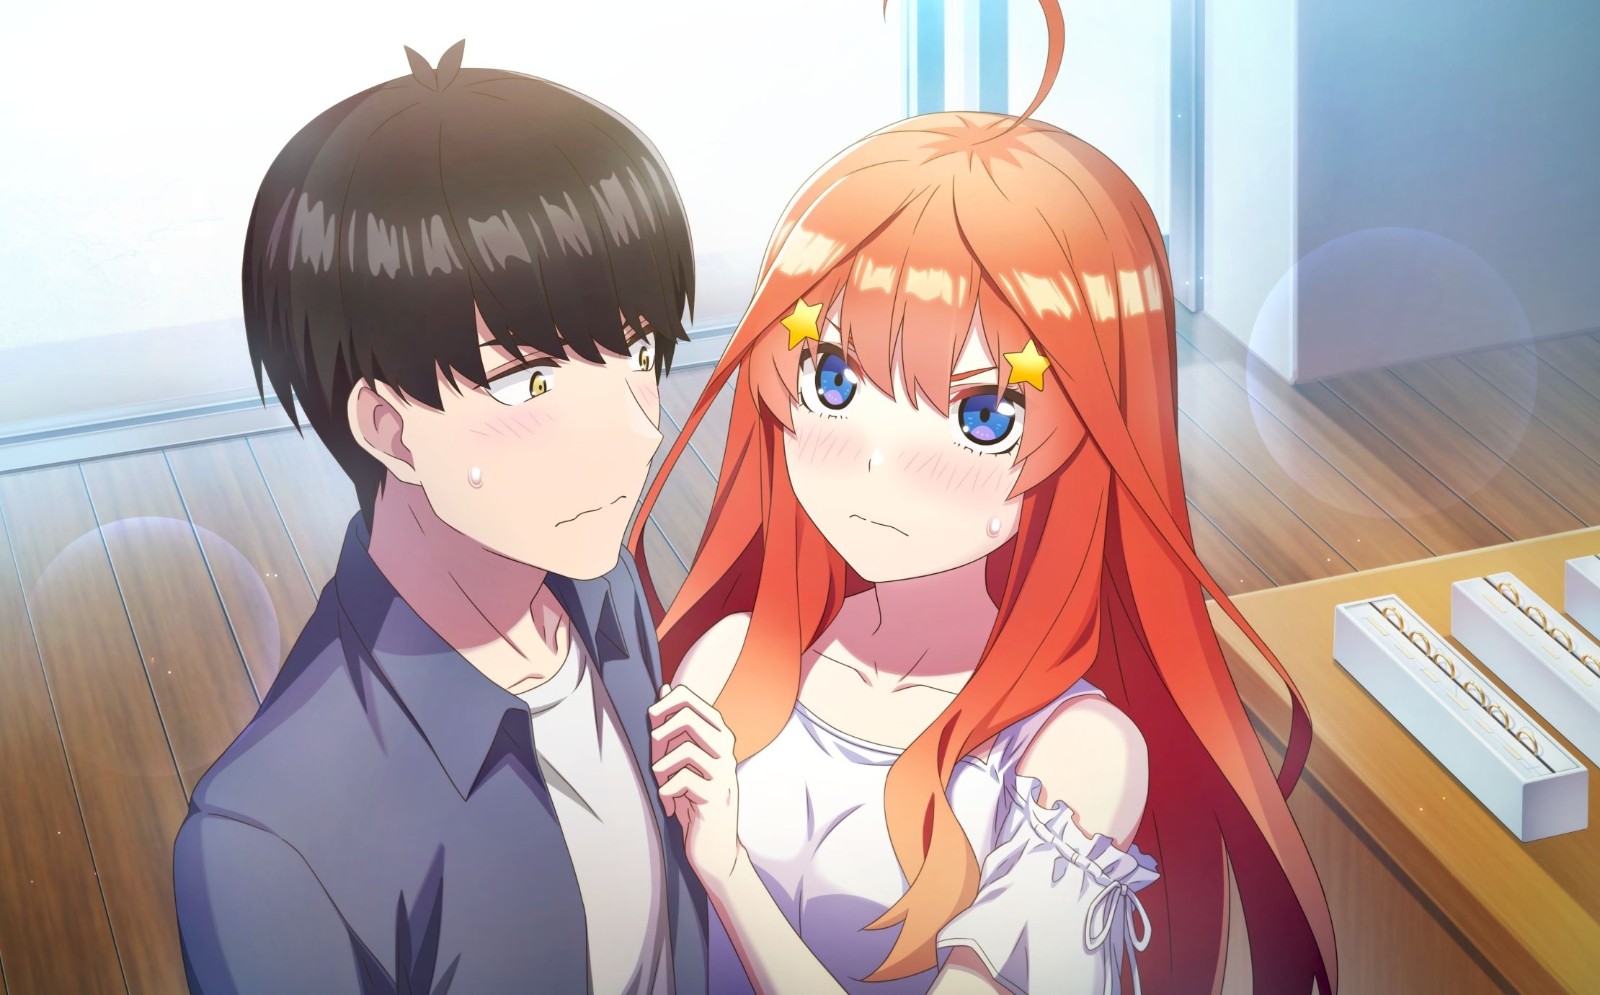 The Quintessential Quintuplets the Movie: Five Memories of My Time with You,The Quintessential Quintuplets the Movie, Visual Novel, Nintendo, Switch, Nintendo Switch, playstation 4, playstation, ps4, English, release date, trailer, screenshots, pre-order now, Japan